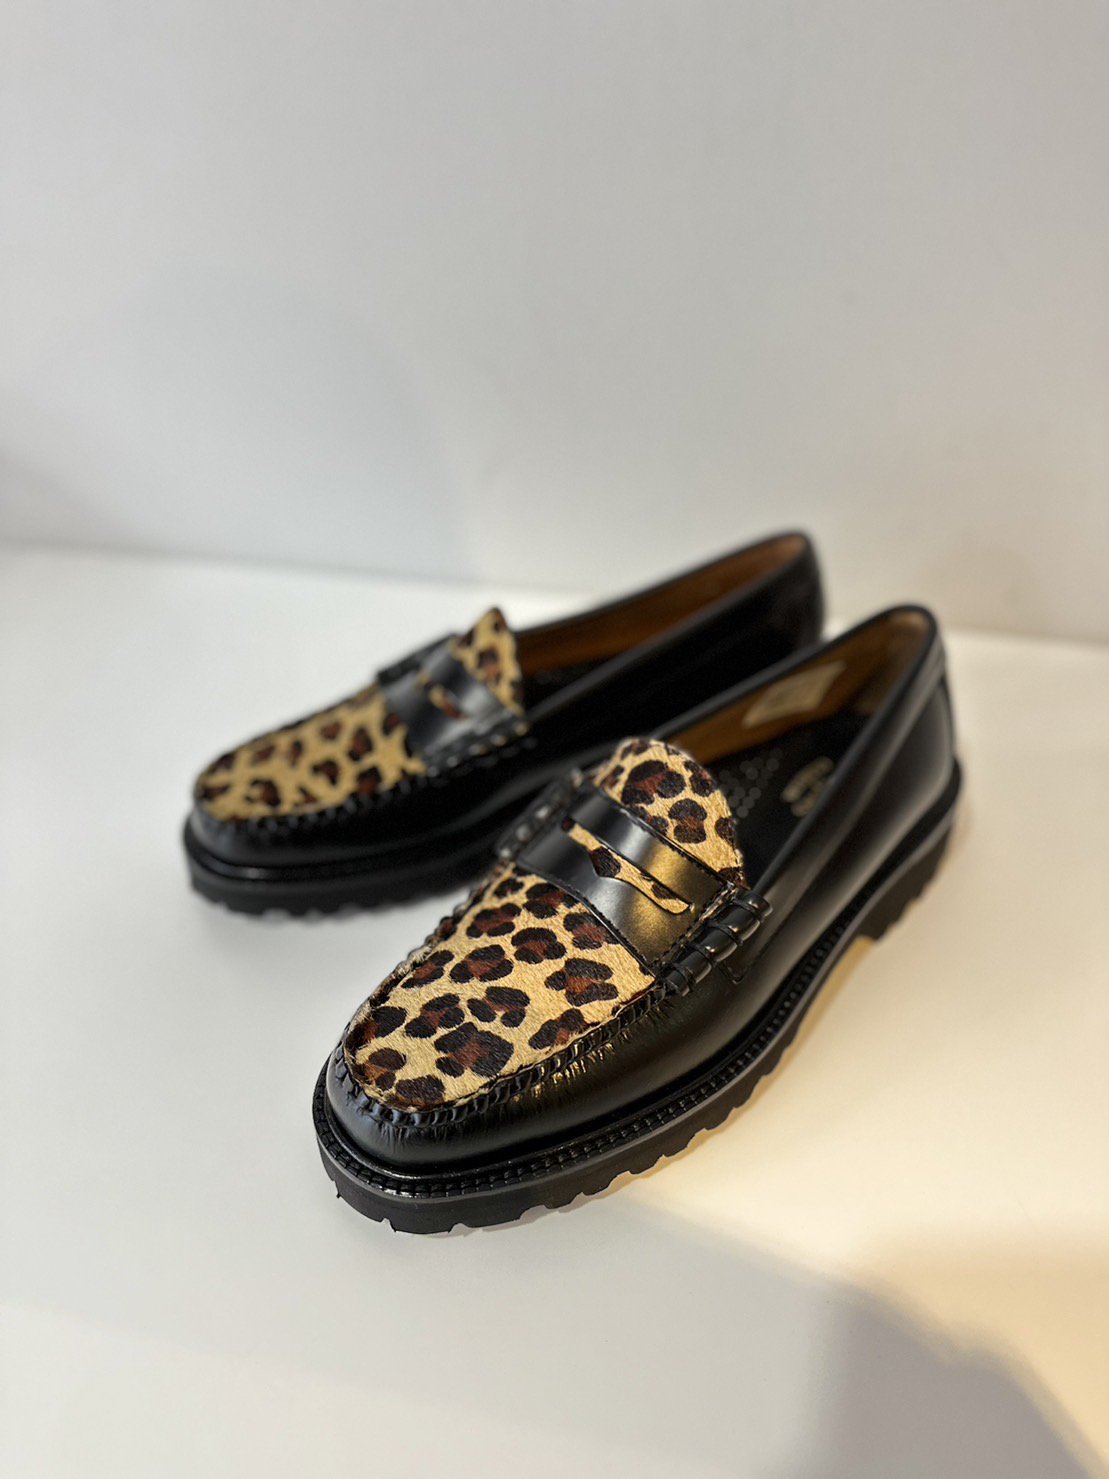 G.H.BASS<br />LARSON EXOTIC / BLACK&LEOPARD (RUBBER SOLE)<img class='new_mark_img2' src='https://img.shop-pro.jp/img/new/icons14.gif' style='border:none;display:inline;margin:0px;padding:0px;width:auto;' />